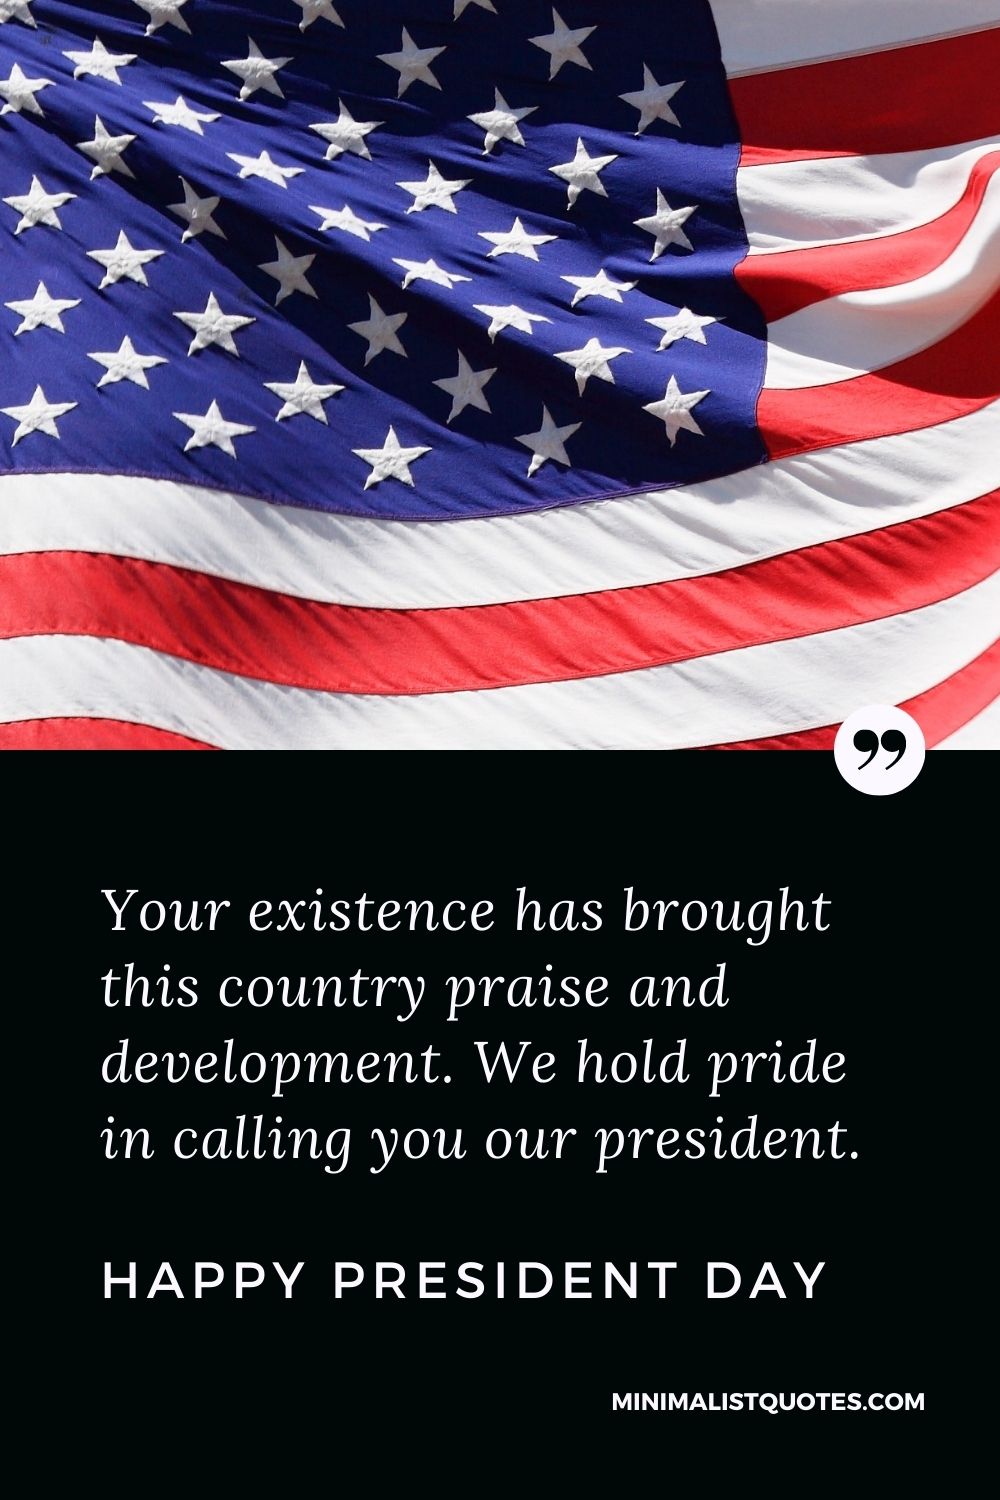 President Day Quote, Wish & Message With Image: Your existence has brought this country praise and development. We hold pride in calling you our president. Happy President Day!